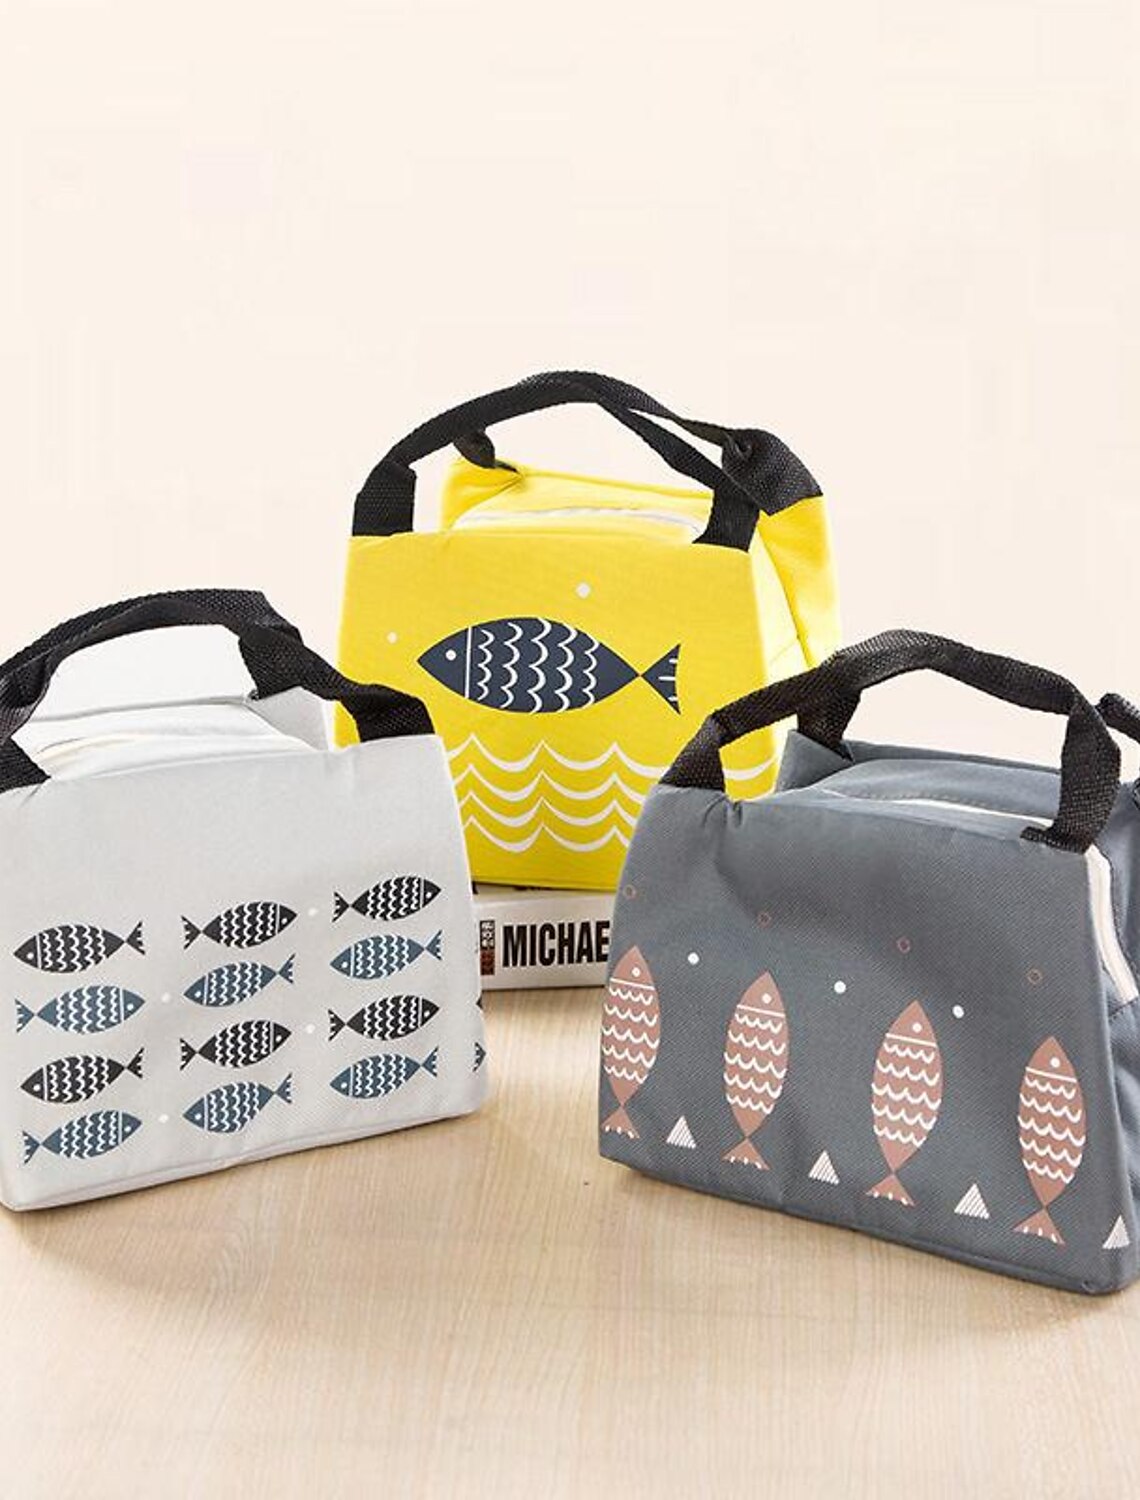 Printed Lunch Bag, Thermal Insulation Hand Bag, Oxford Cloth, Aluminum Foil Insulation Layer